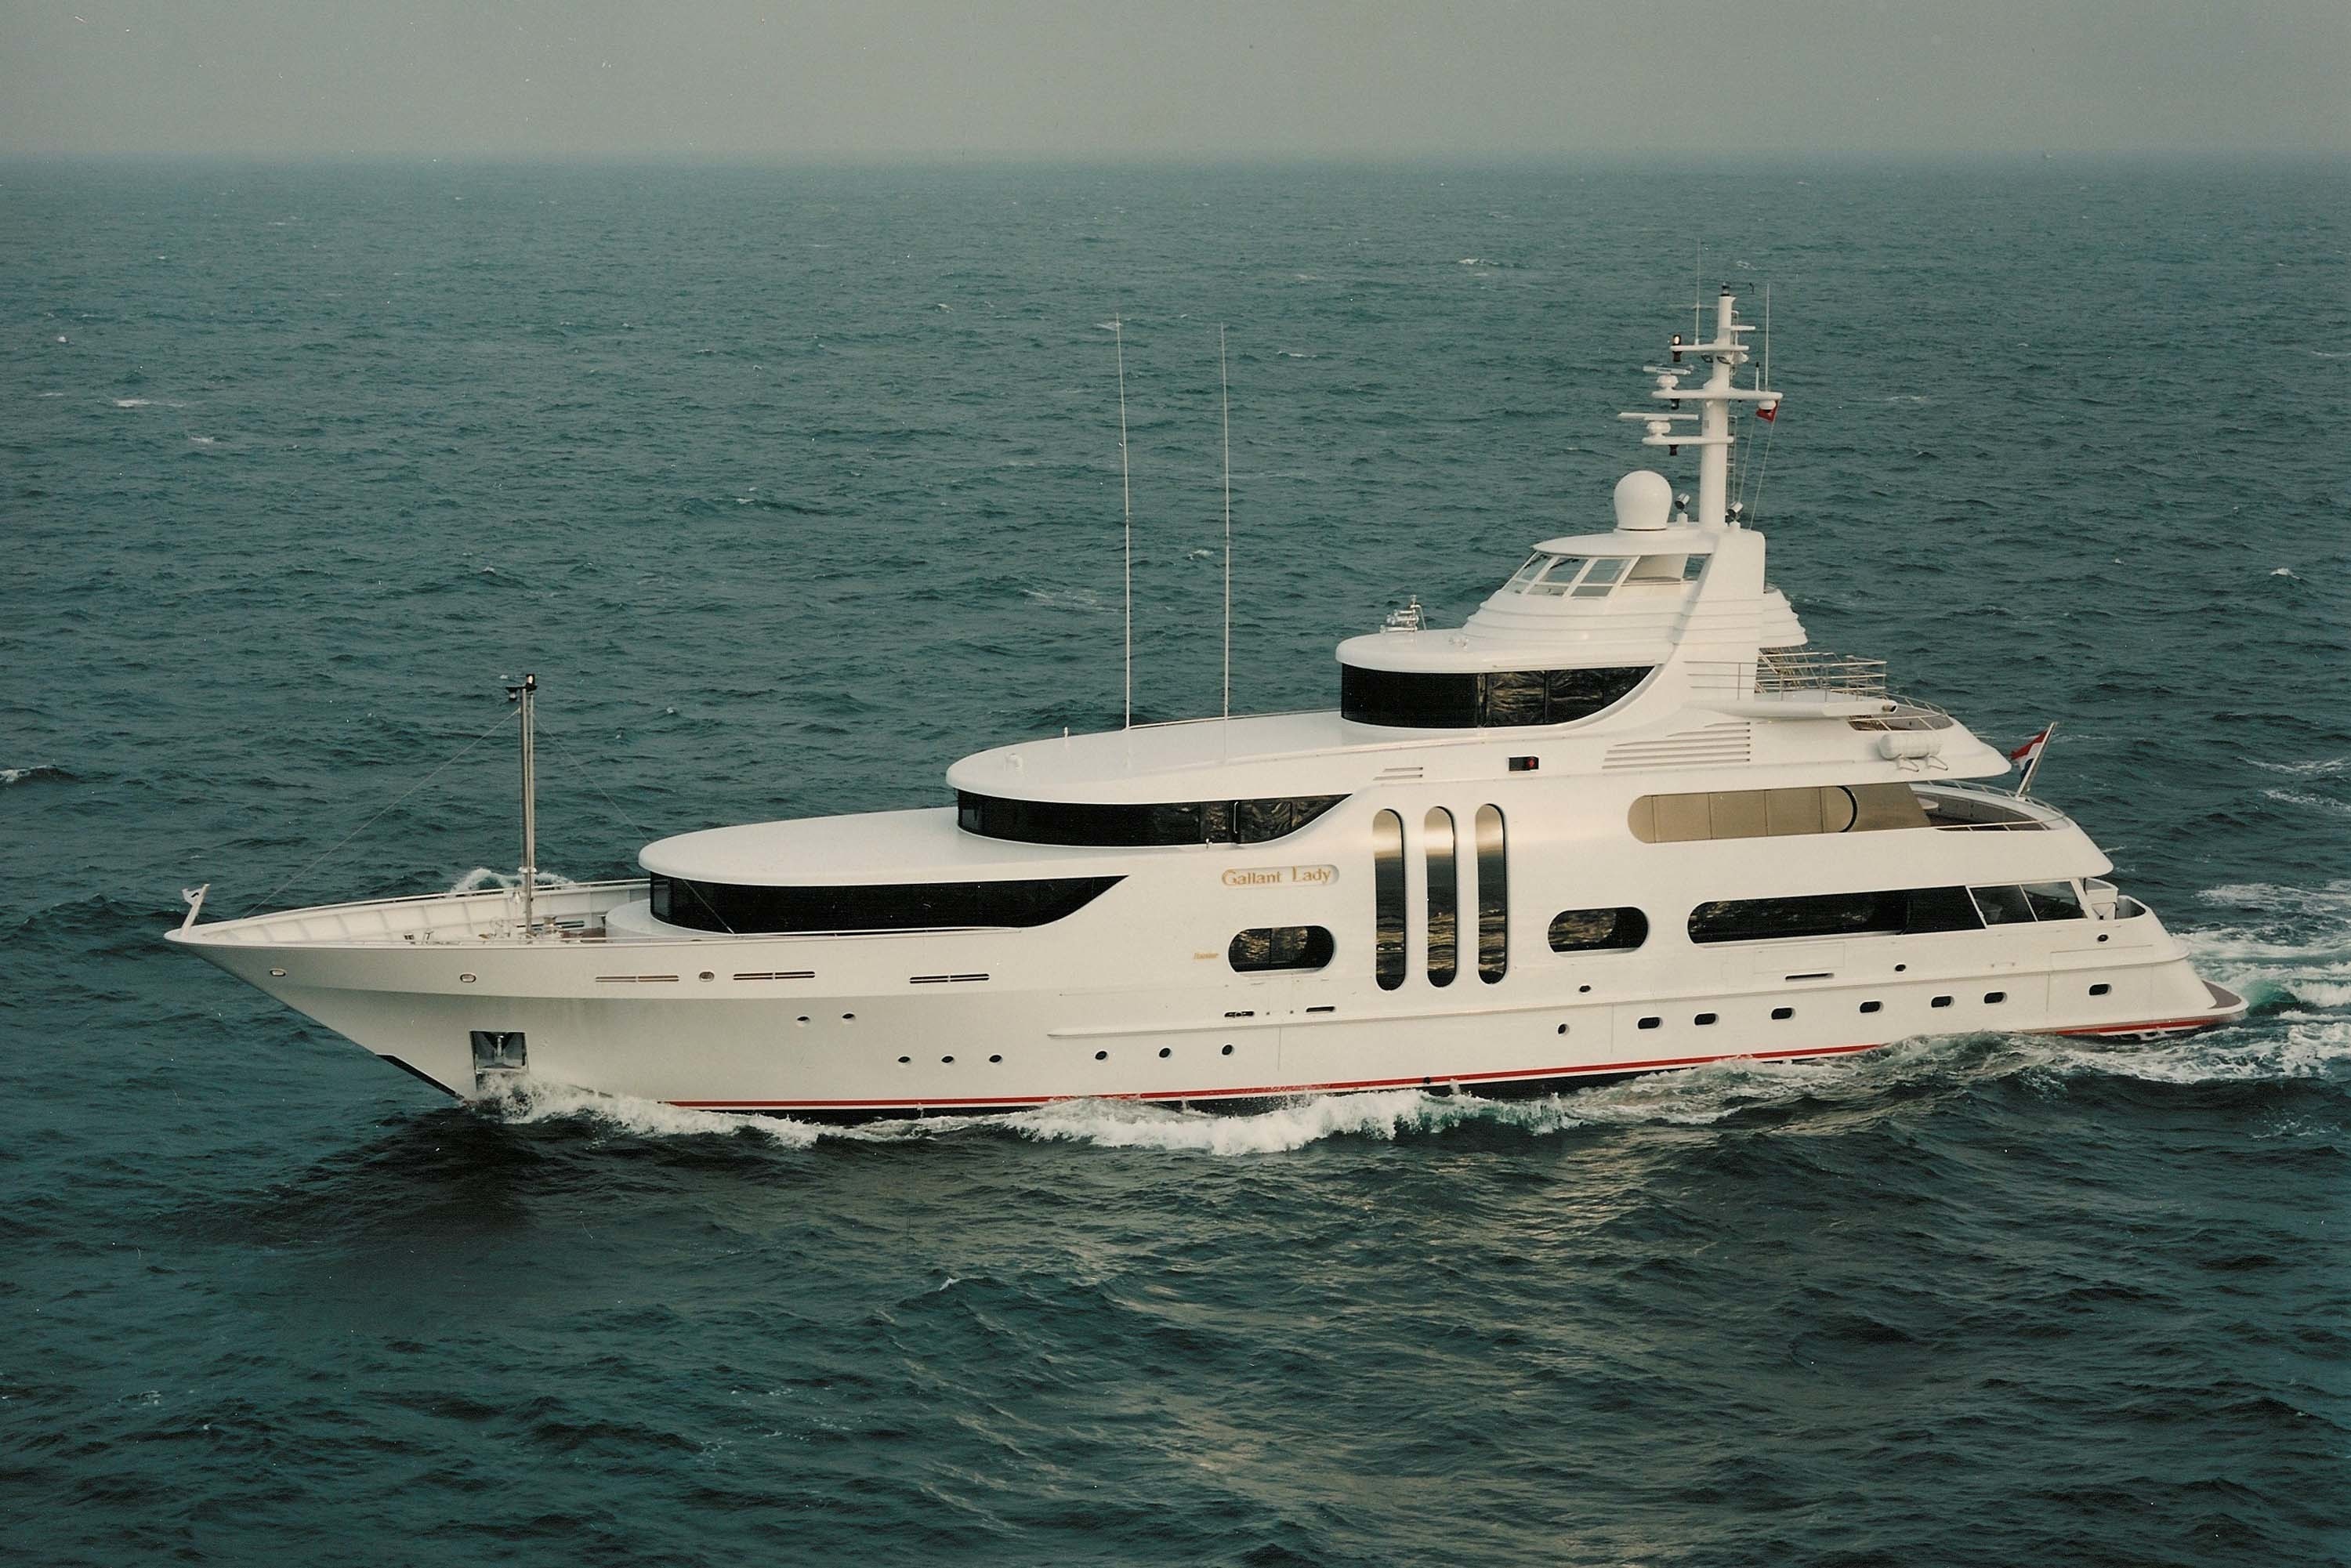 yacht named gallant lady